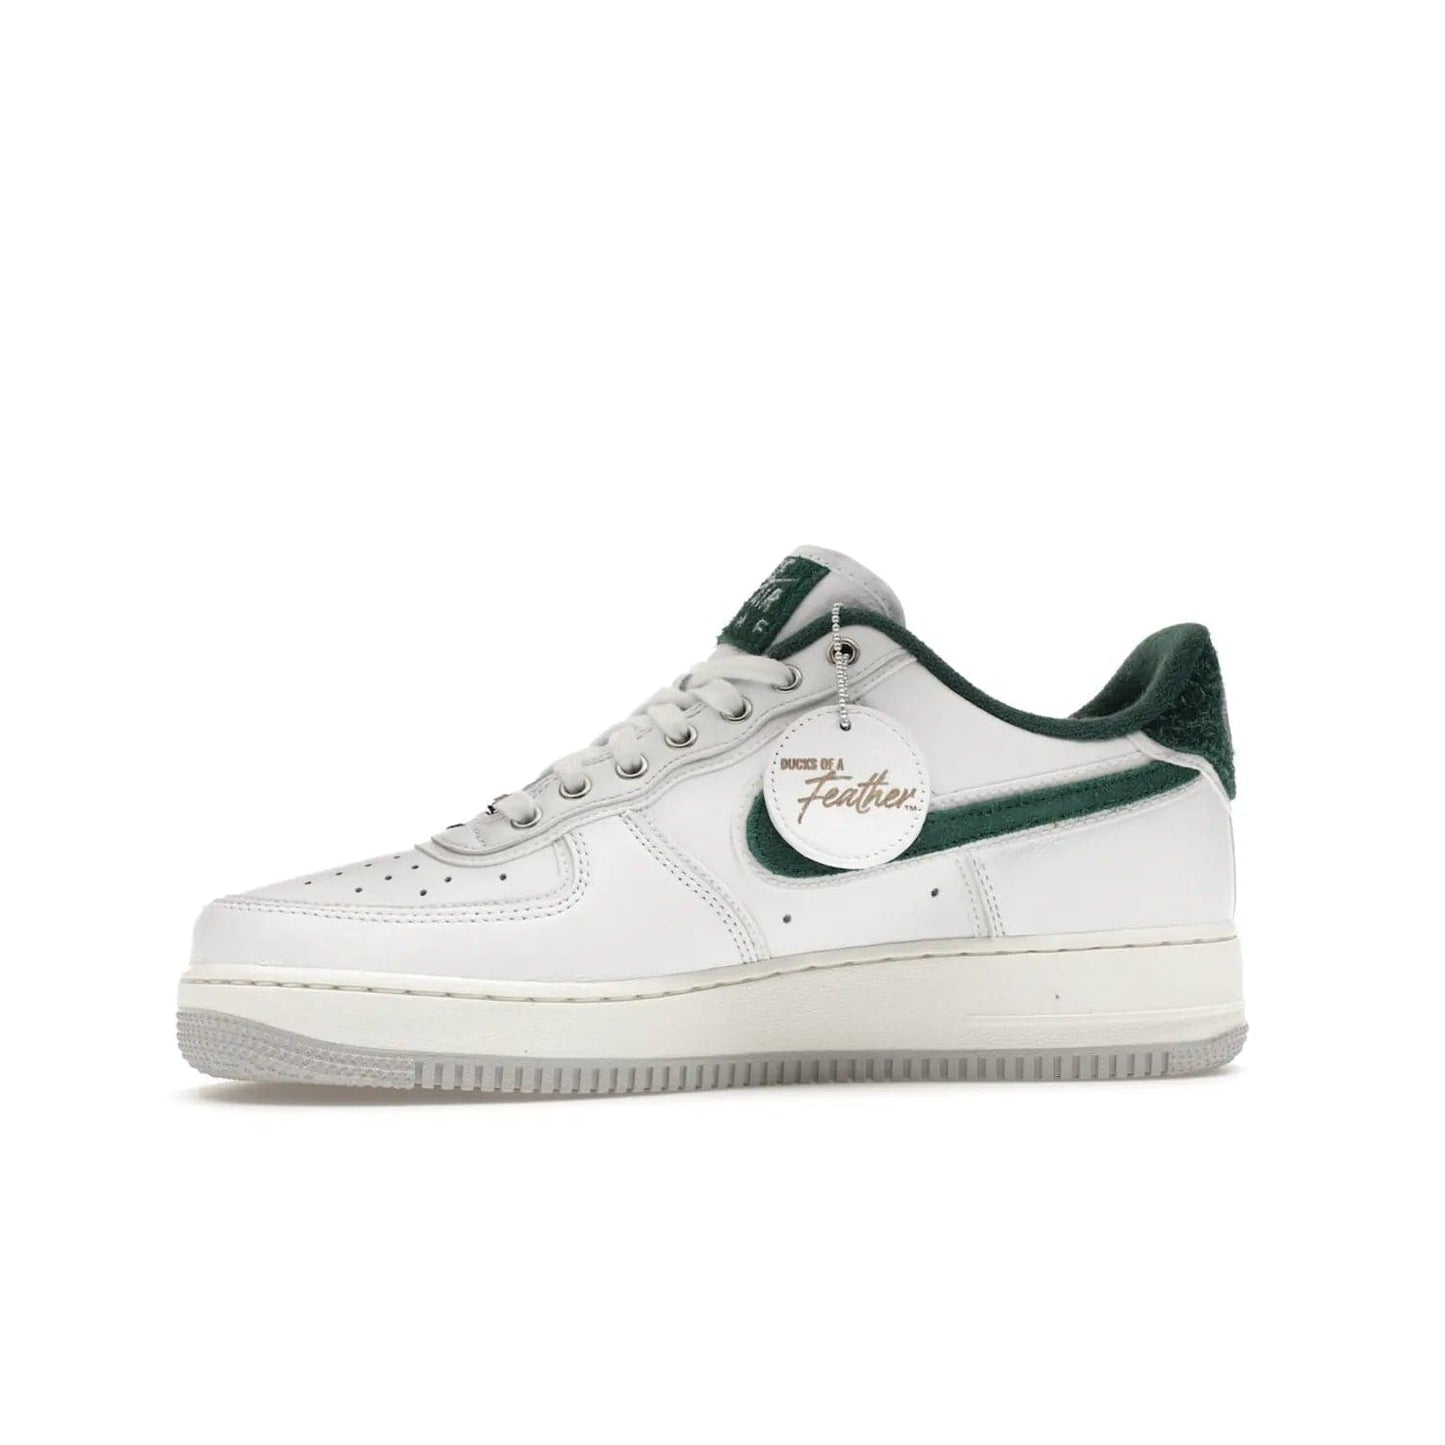 Nike Air Force 1 Low '07 Premium University of Oregon PE - Image 18 - Only at www.BallersClubKickz.com - The Nike Air Force 1 Low '07 Premium. Special Oregon University colorway. White base with green and sail accents. Cushioned rubber midsole. Comfort and style. Support your school!